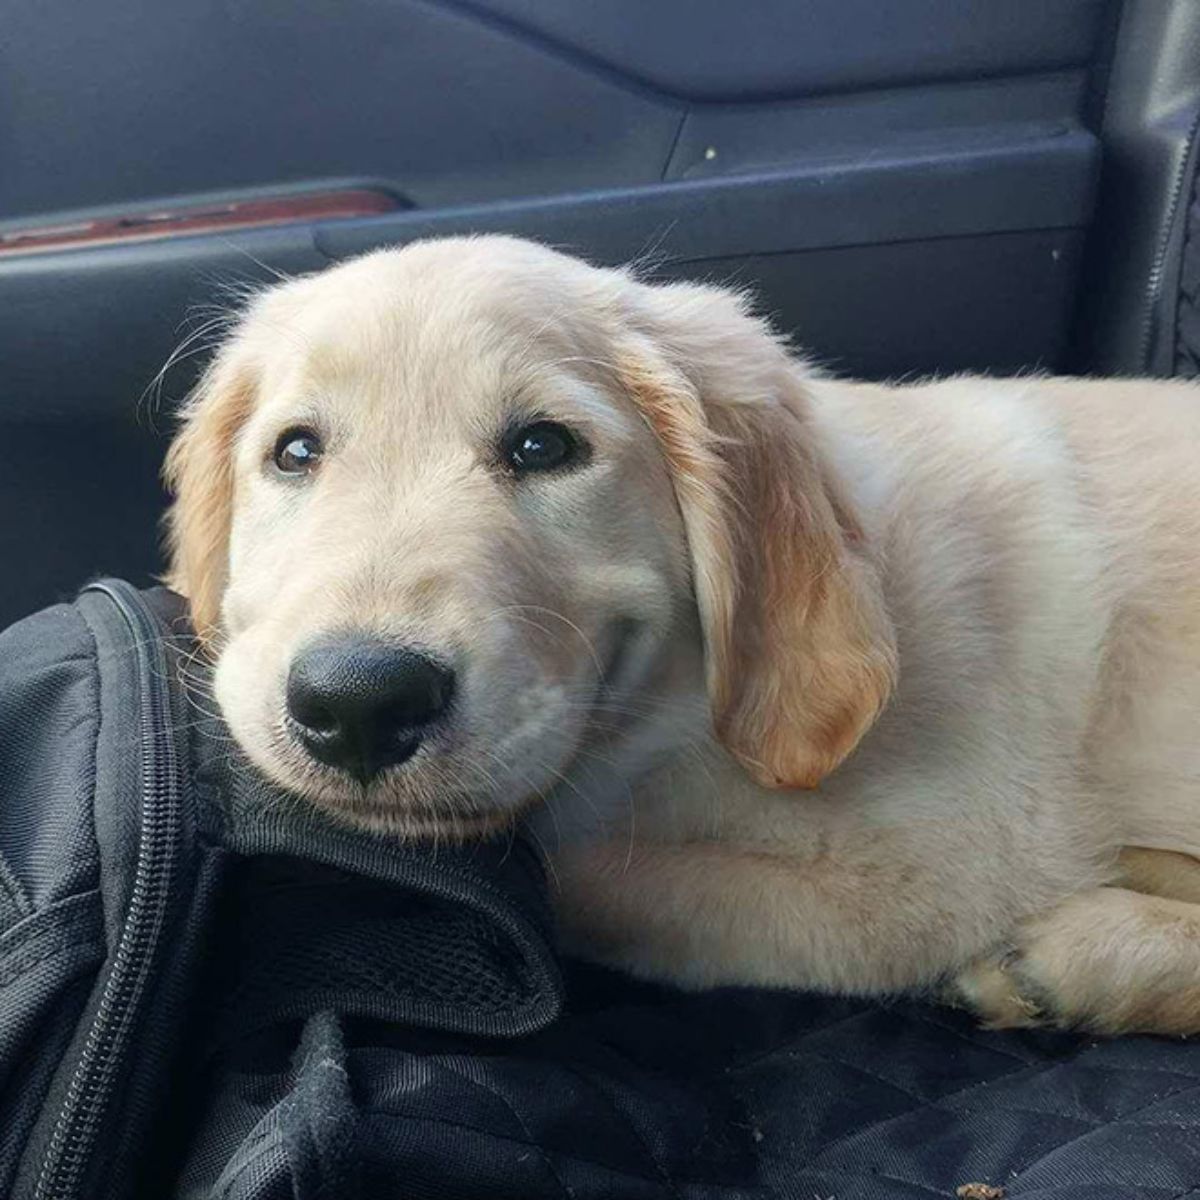 smiling golden retriever puppy in a vehicle placing the chin on a black backpack